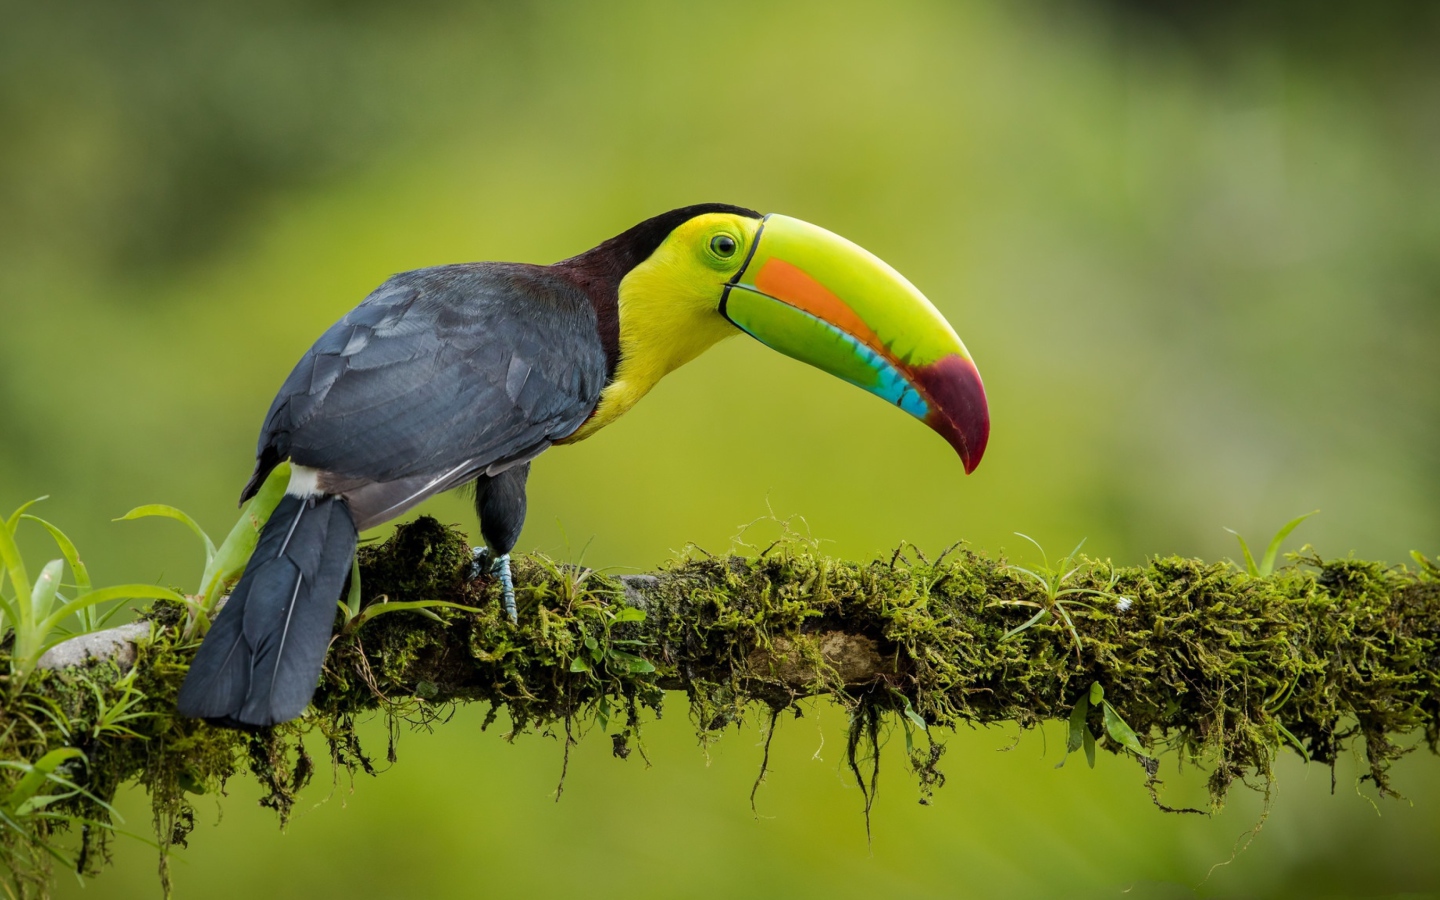 A multi-colored toucan is sitting on a branch